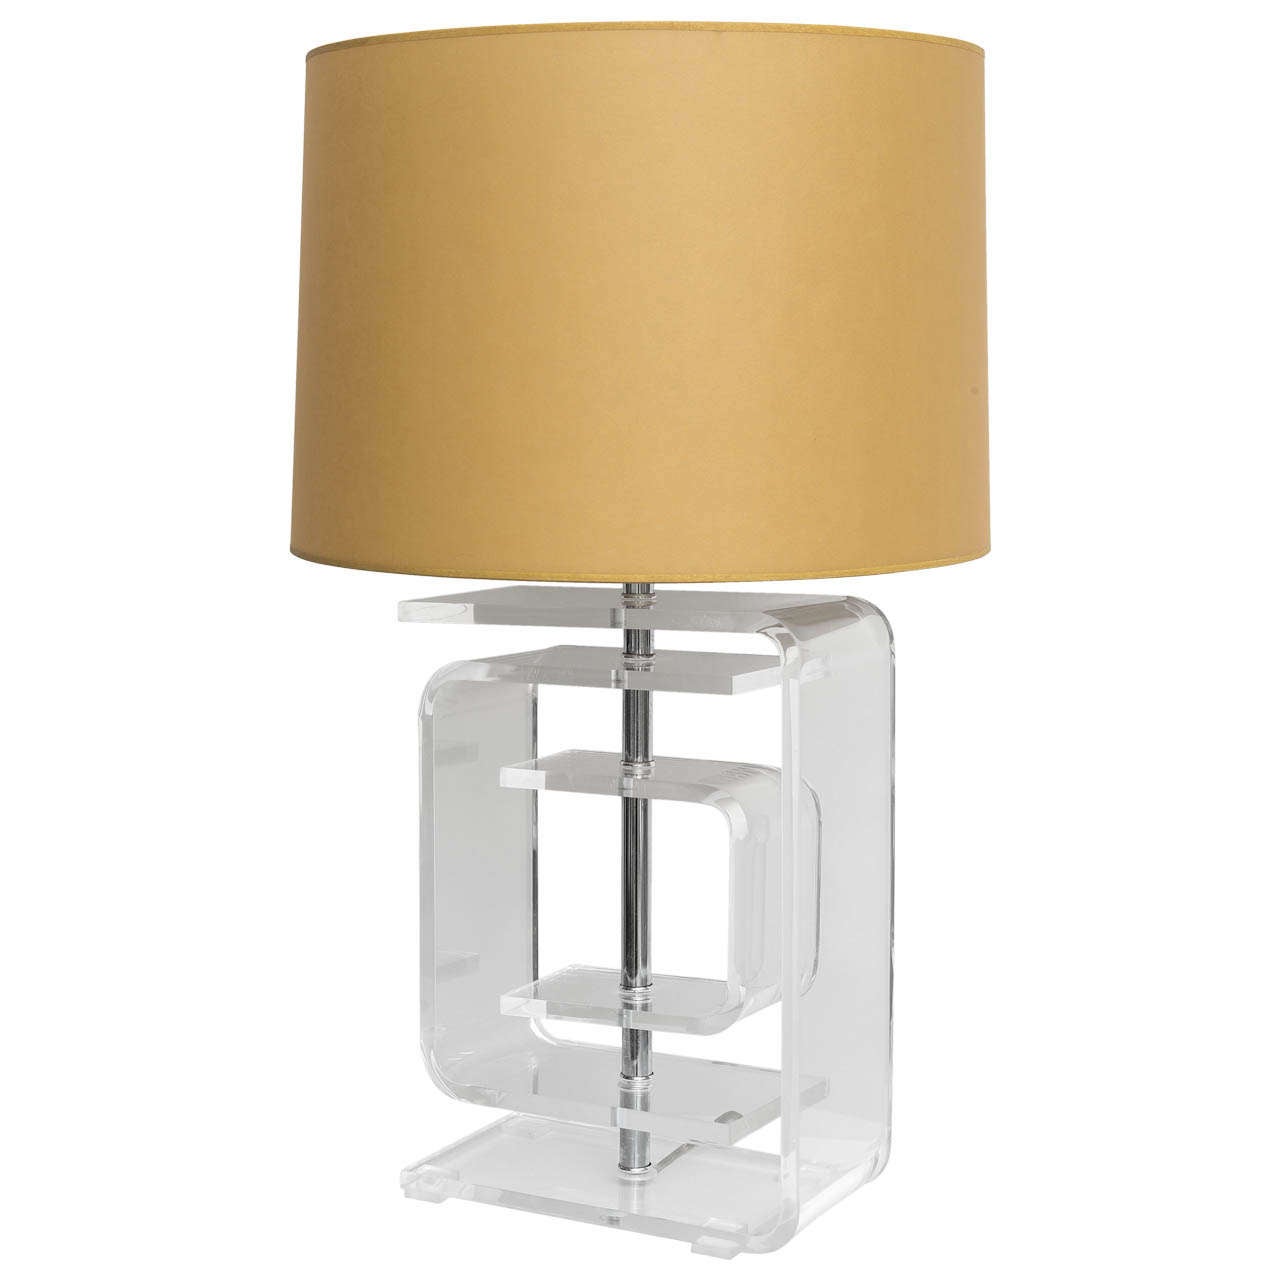 Midcentury Lucite Interfacing Table Lamp For Sale